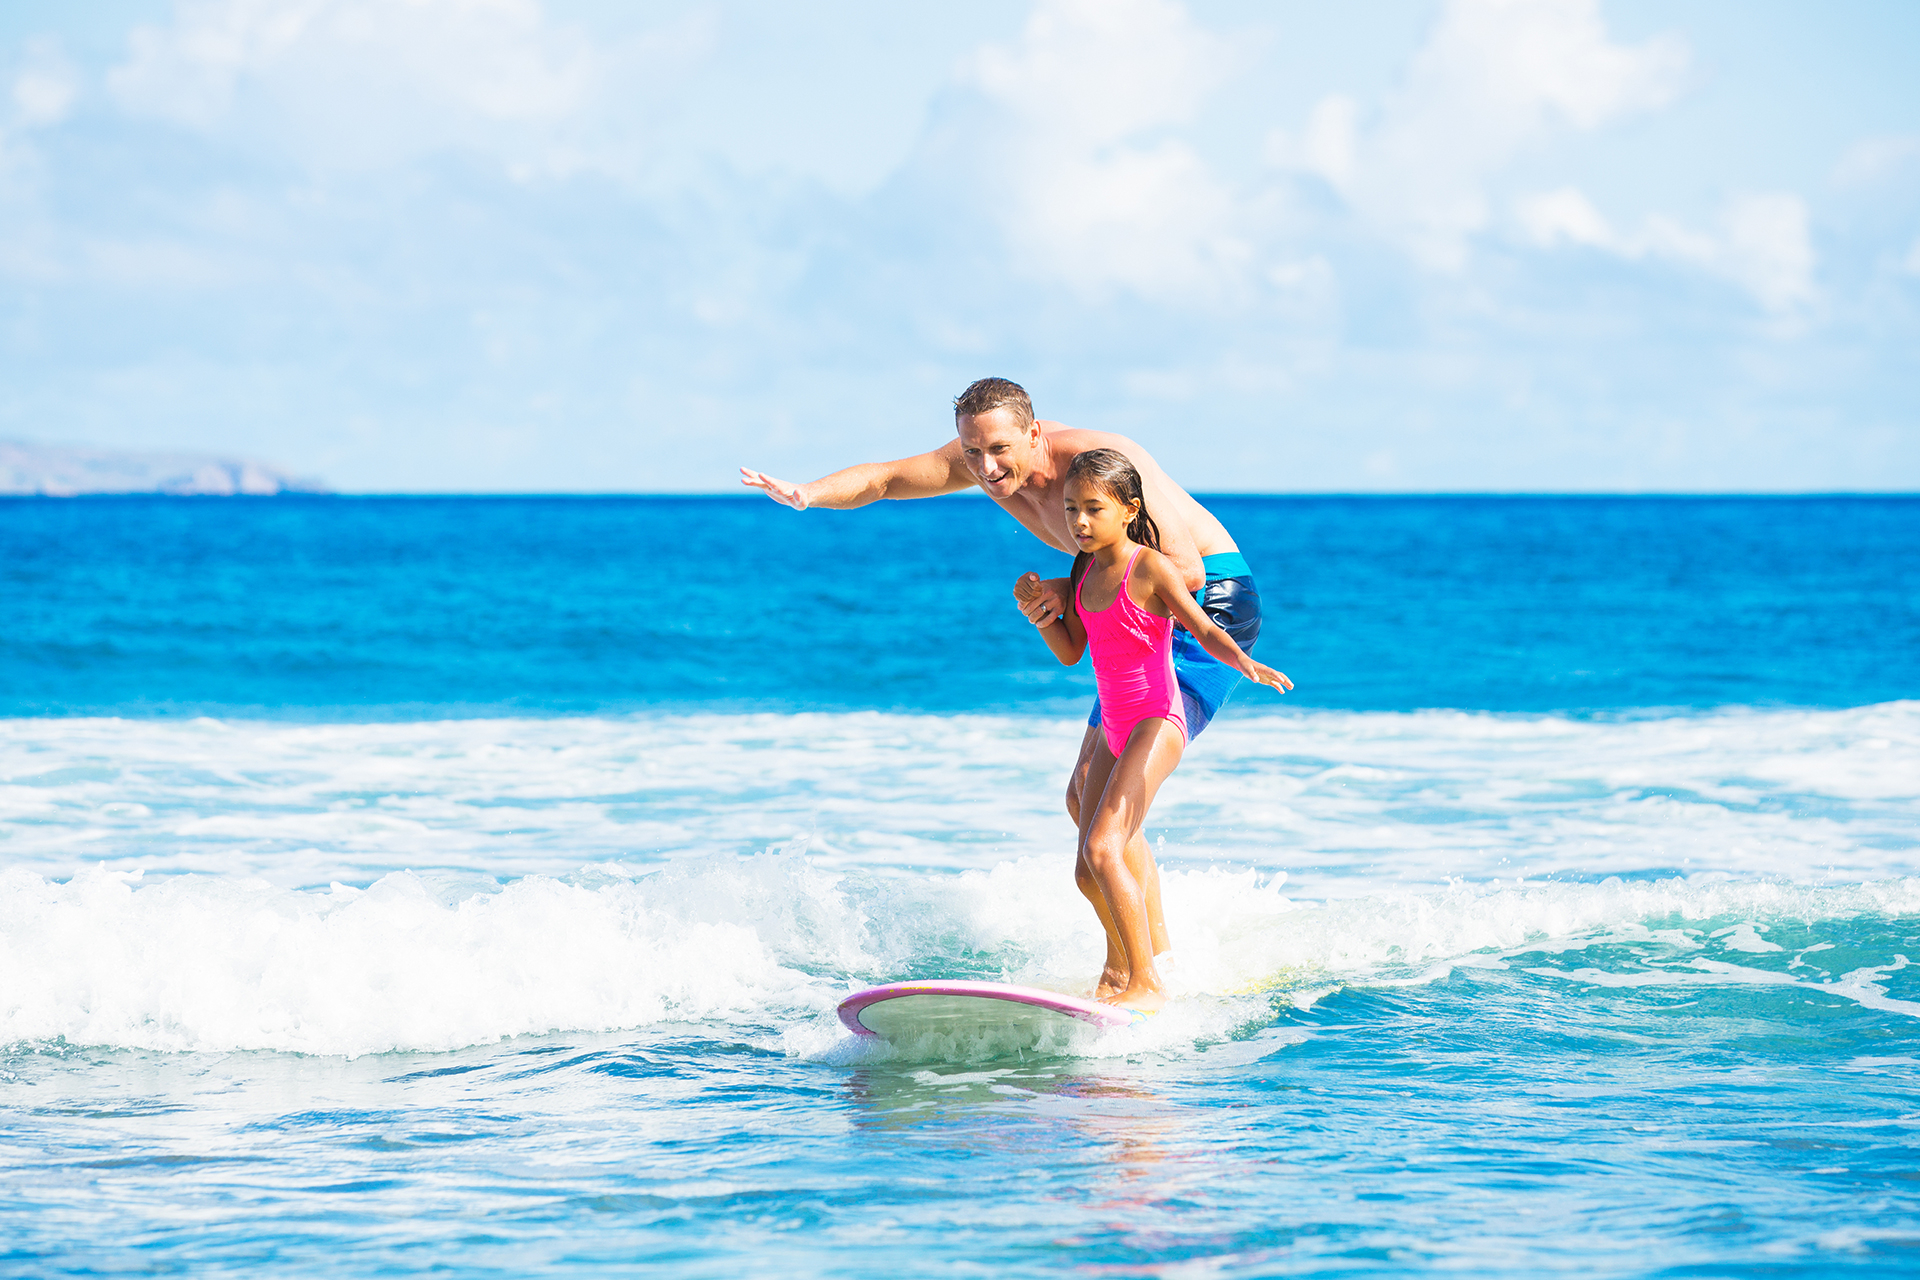 Girl in fluorescent pink bathing suit on surfboard, with adult male behind her, coaching her to surf